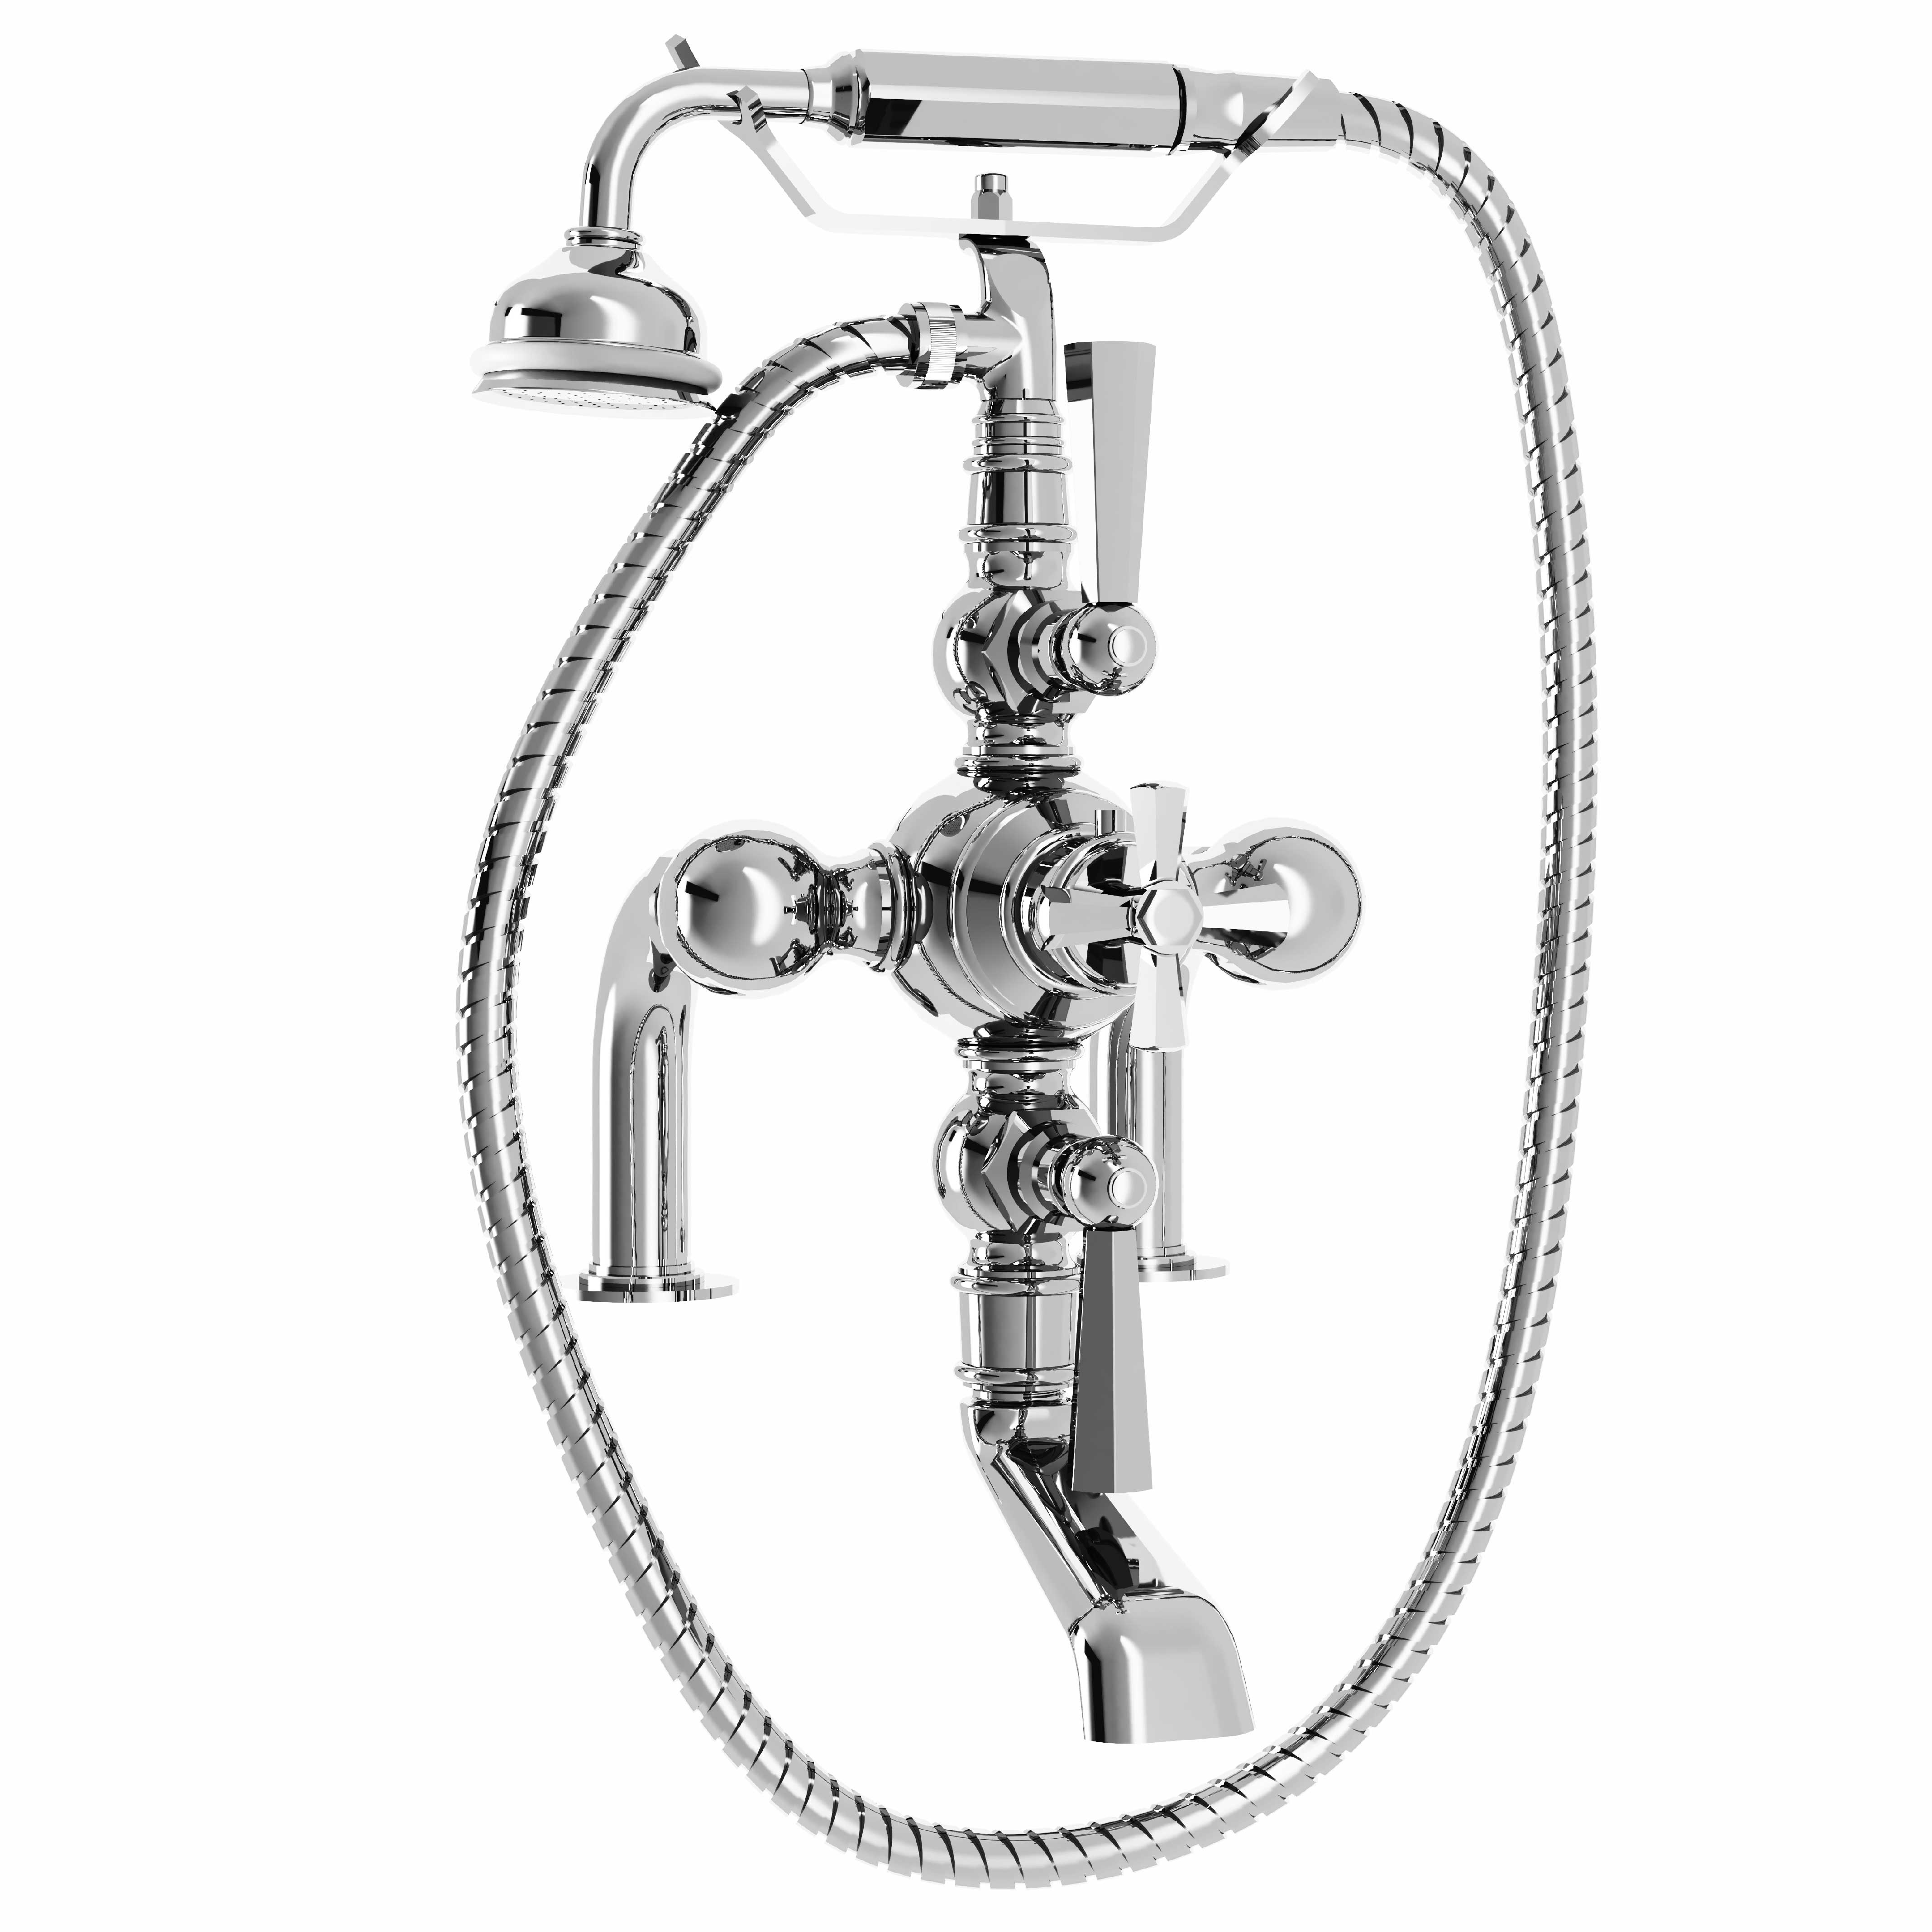 M38-3306T Rim mounted thermo. bath and shower mixer